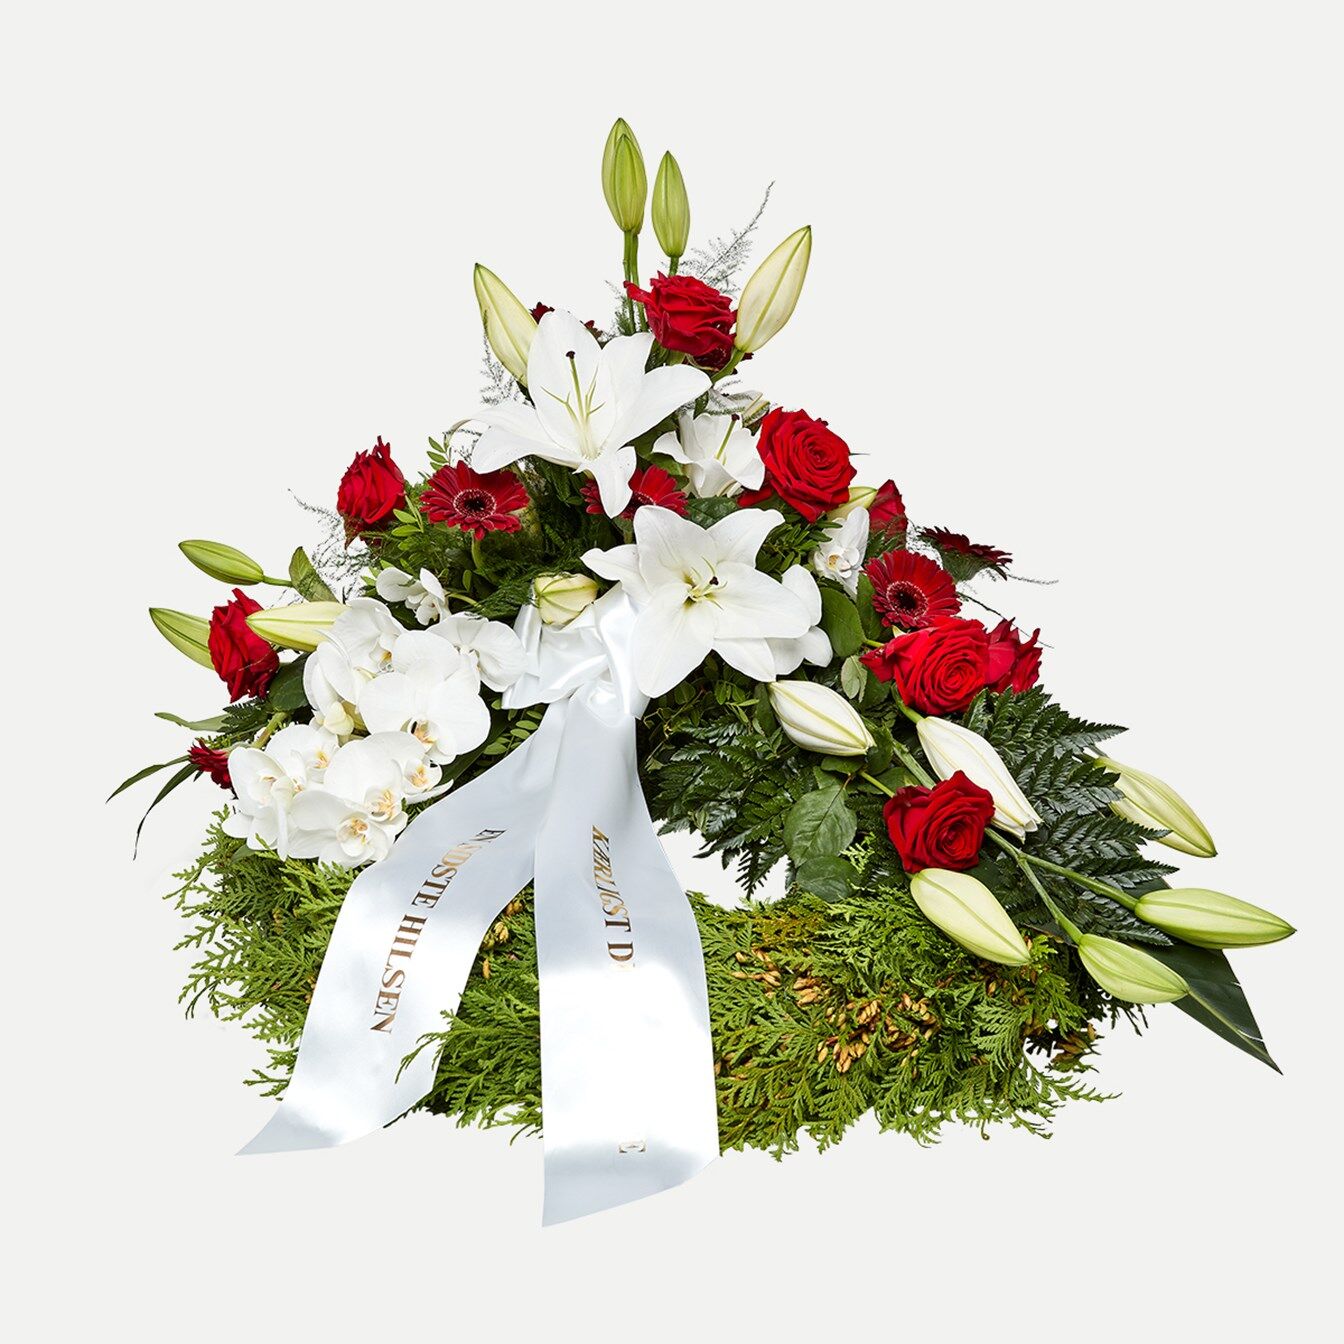 Classic wreath with decoration - white and red